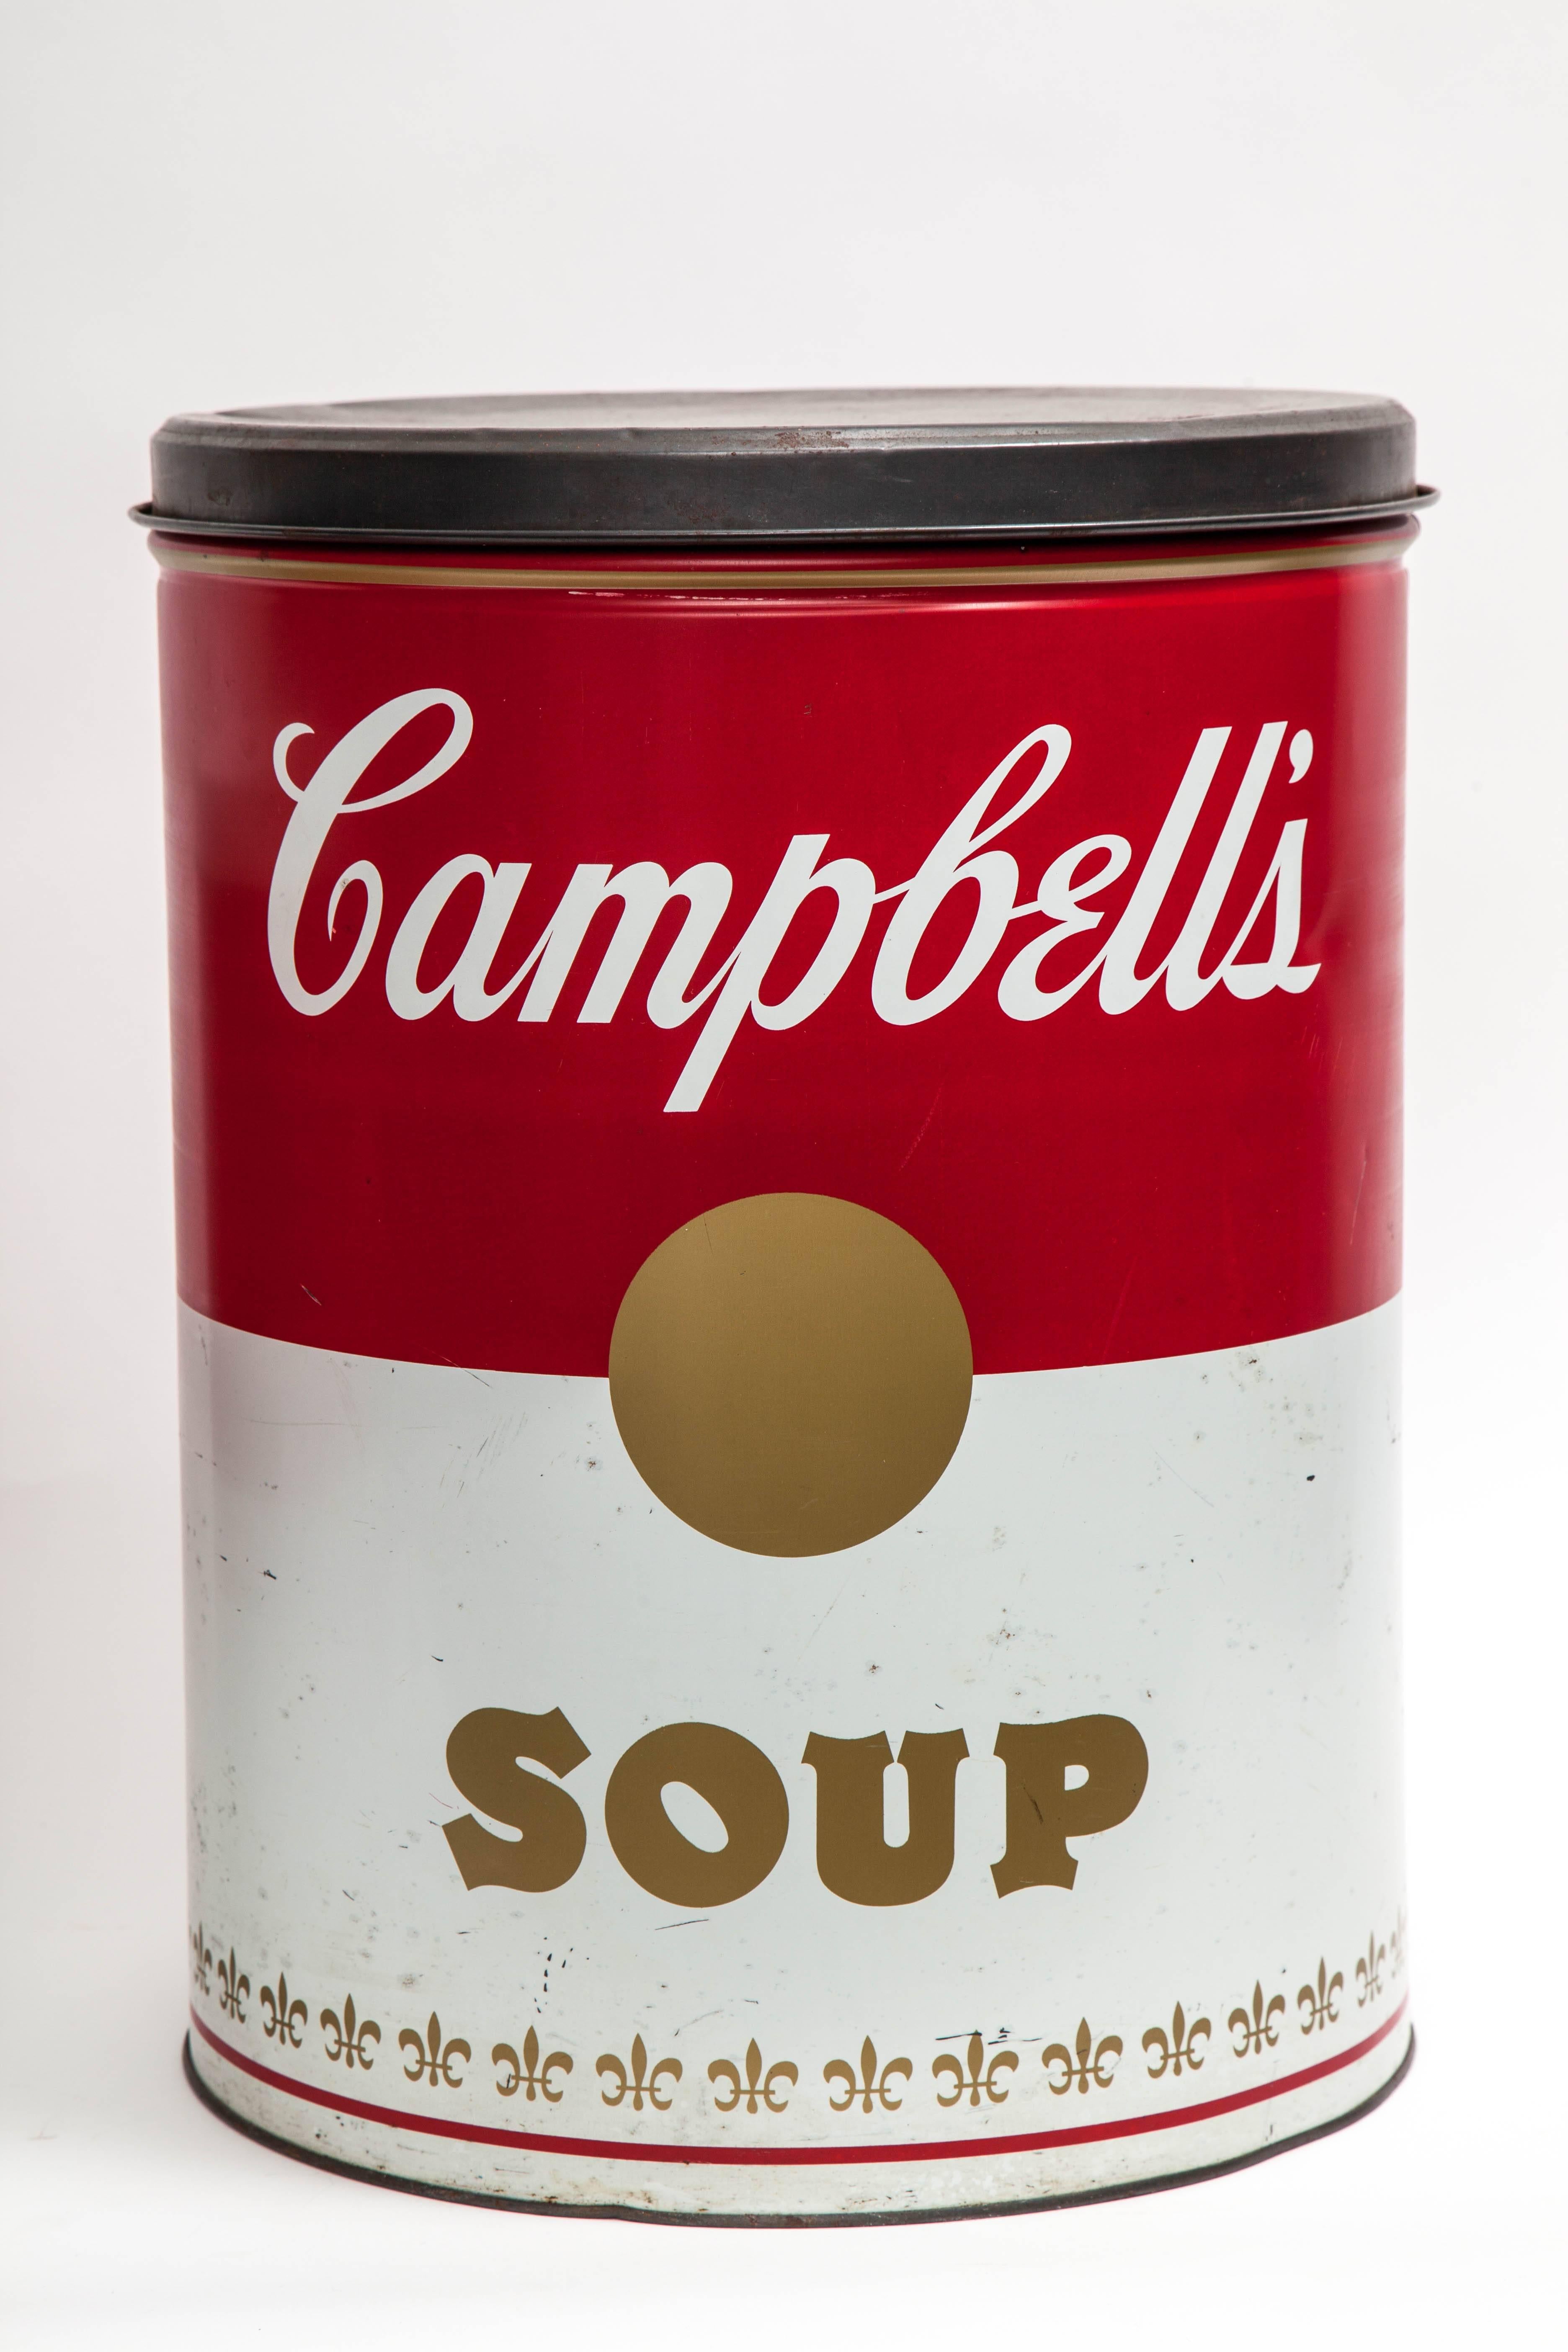 Metal Andy Warhol 'after' Pop Art Campbell's Soup Cans, USA, 1960s